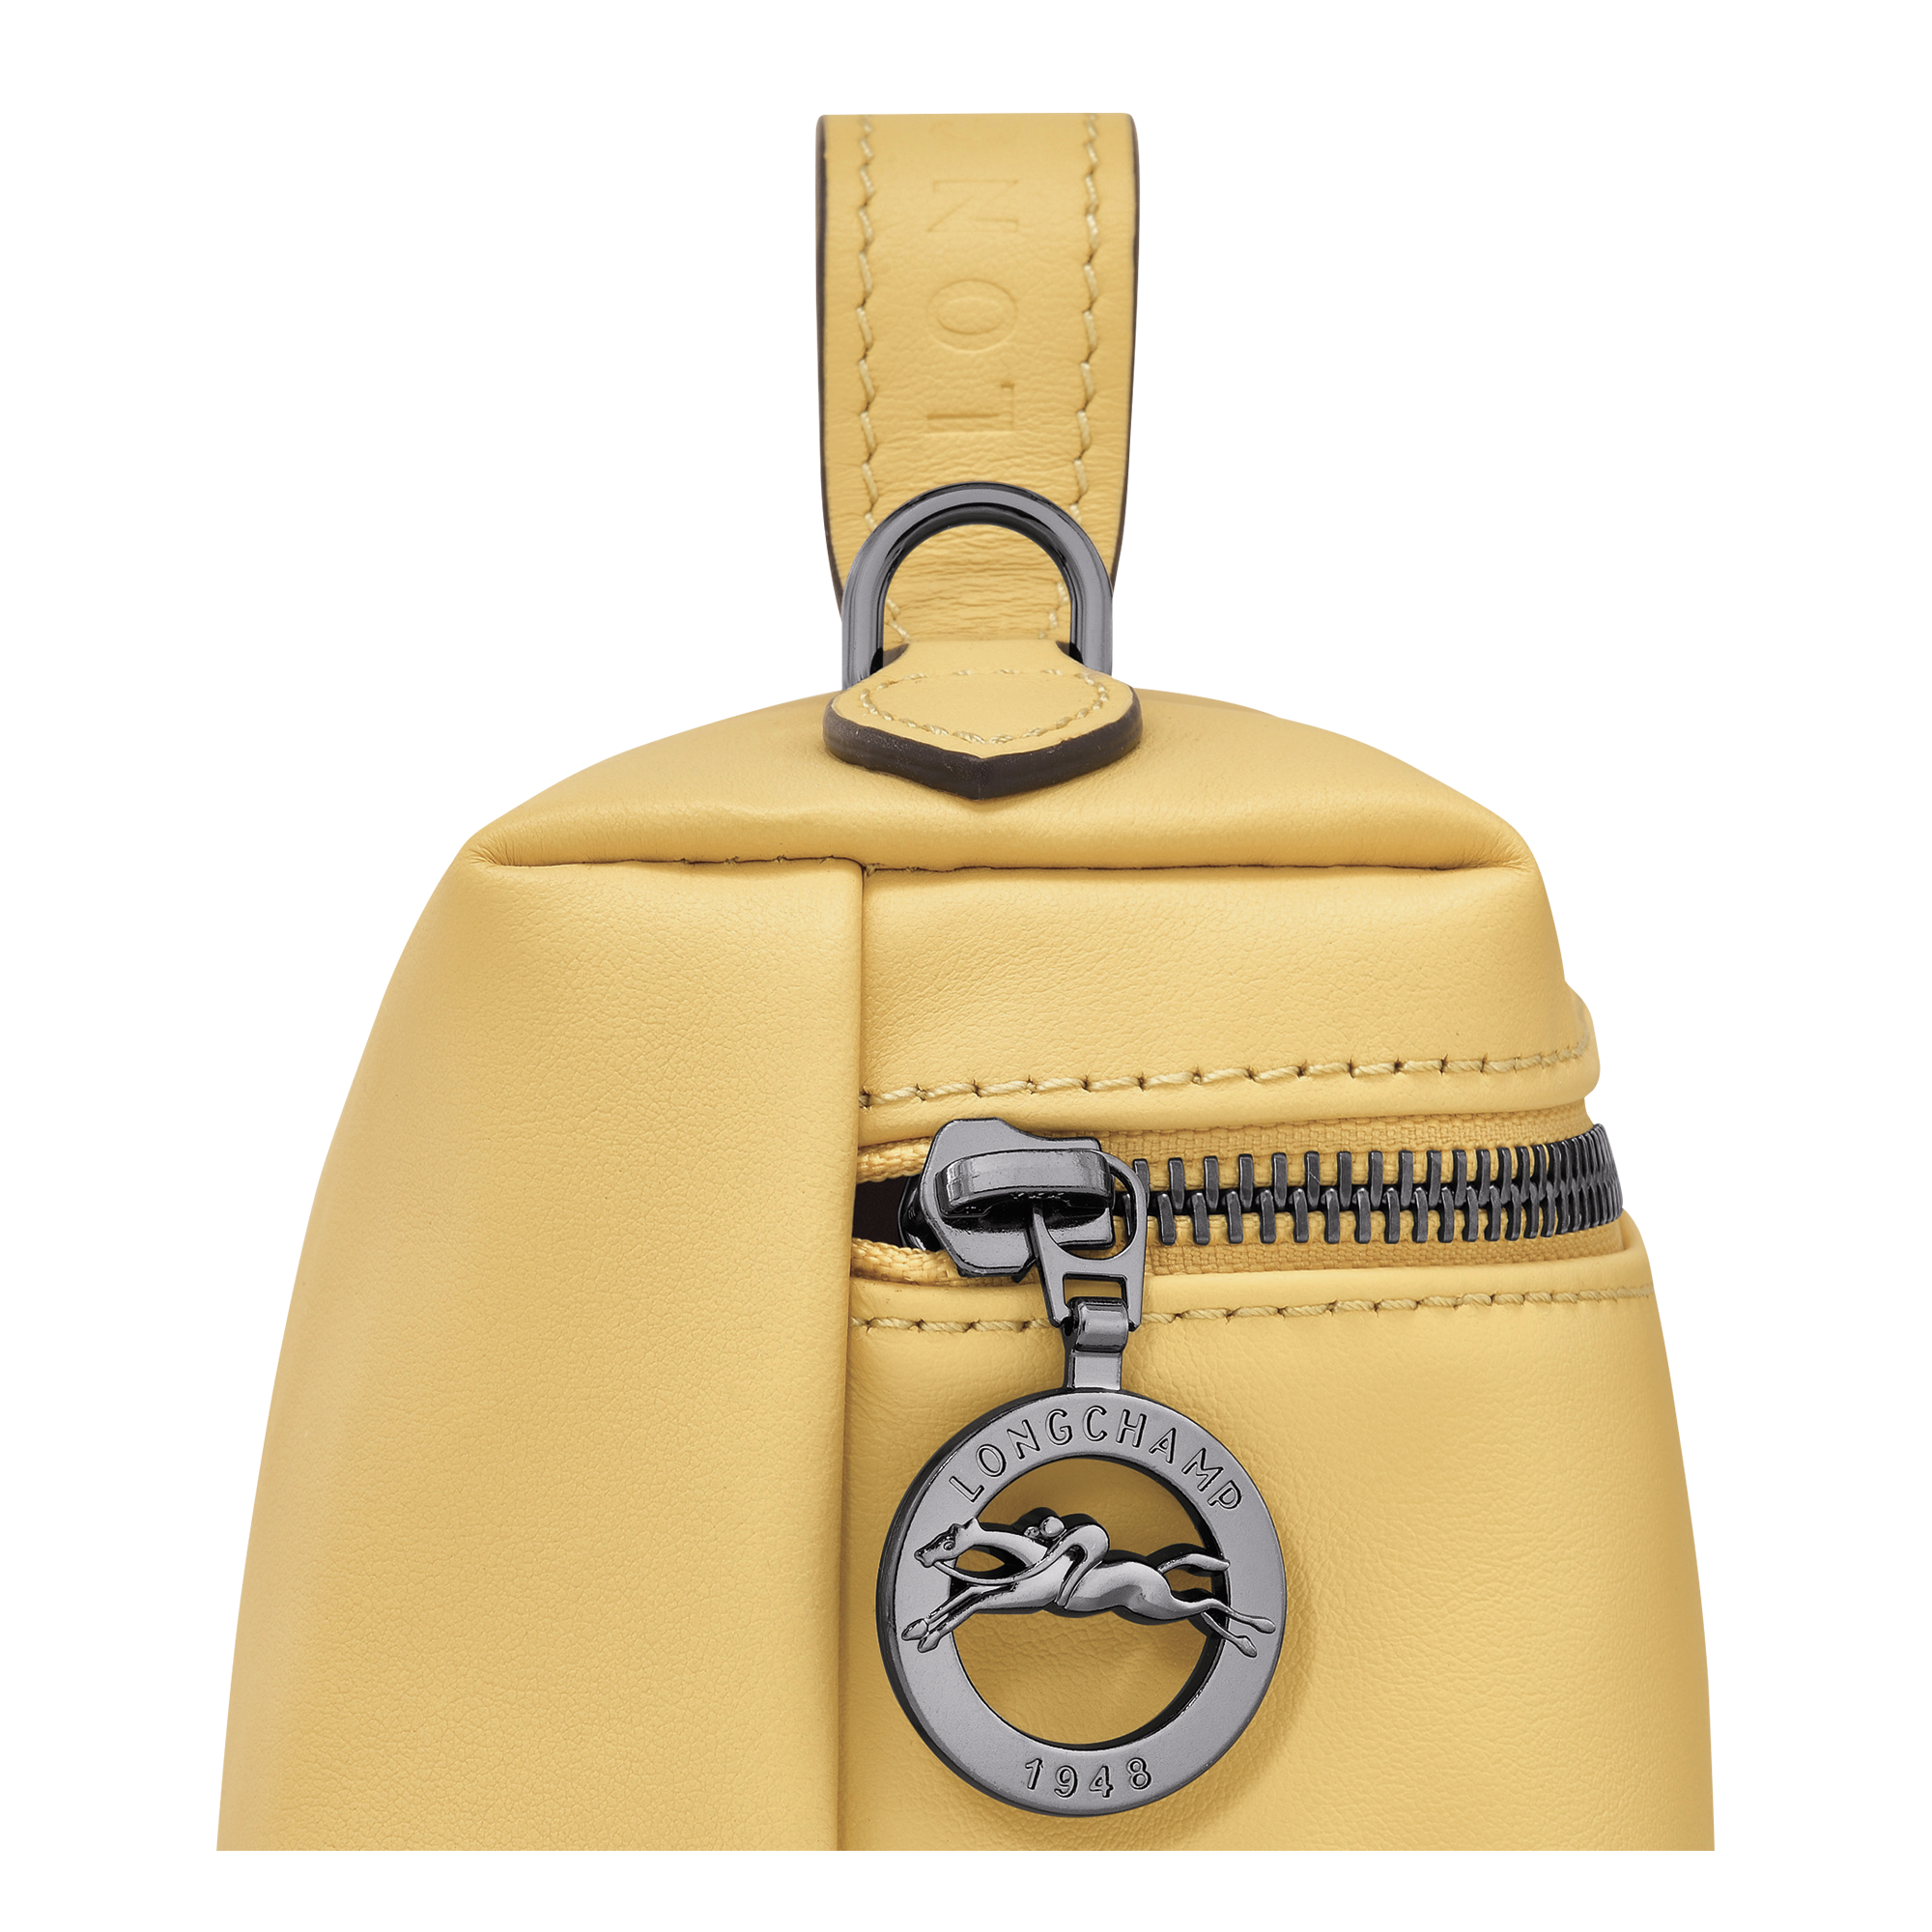 Le Pliage Xtra Pouch Wheat - Leather (34174987A81)